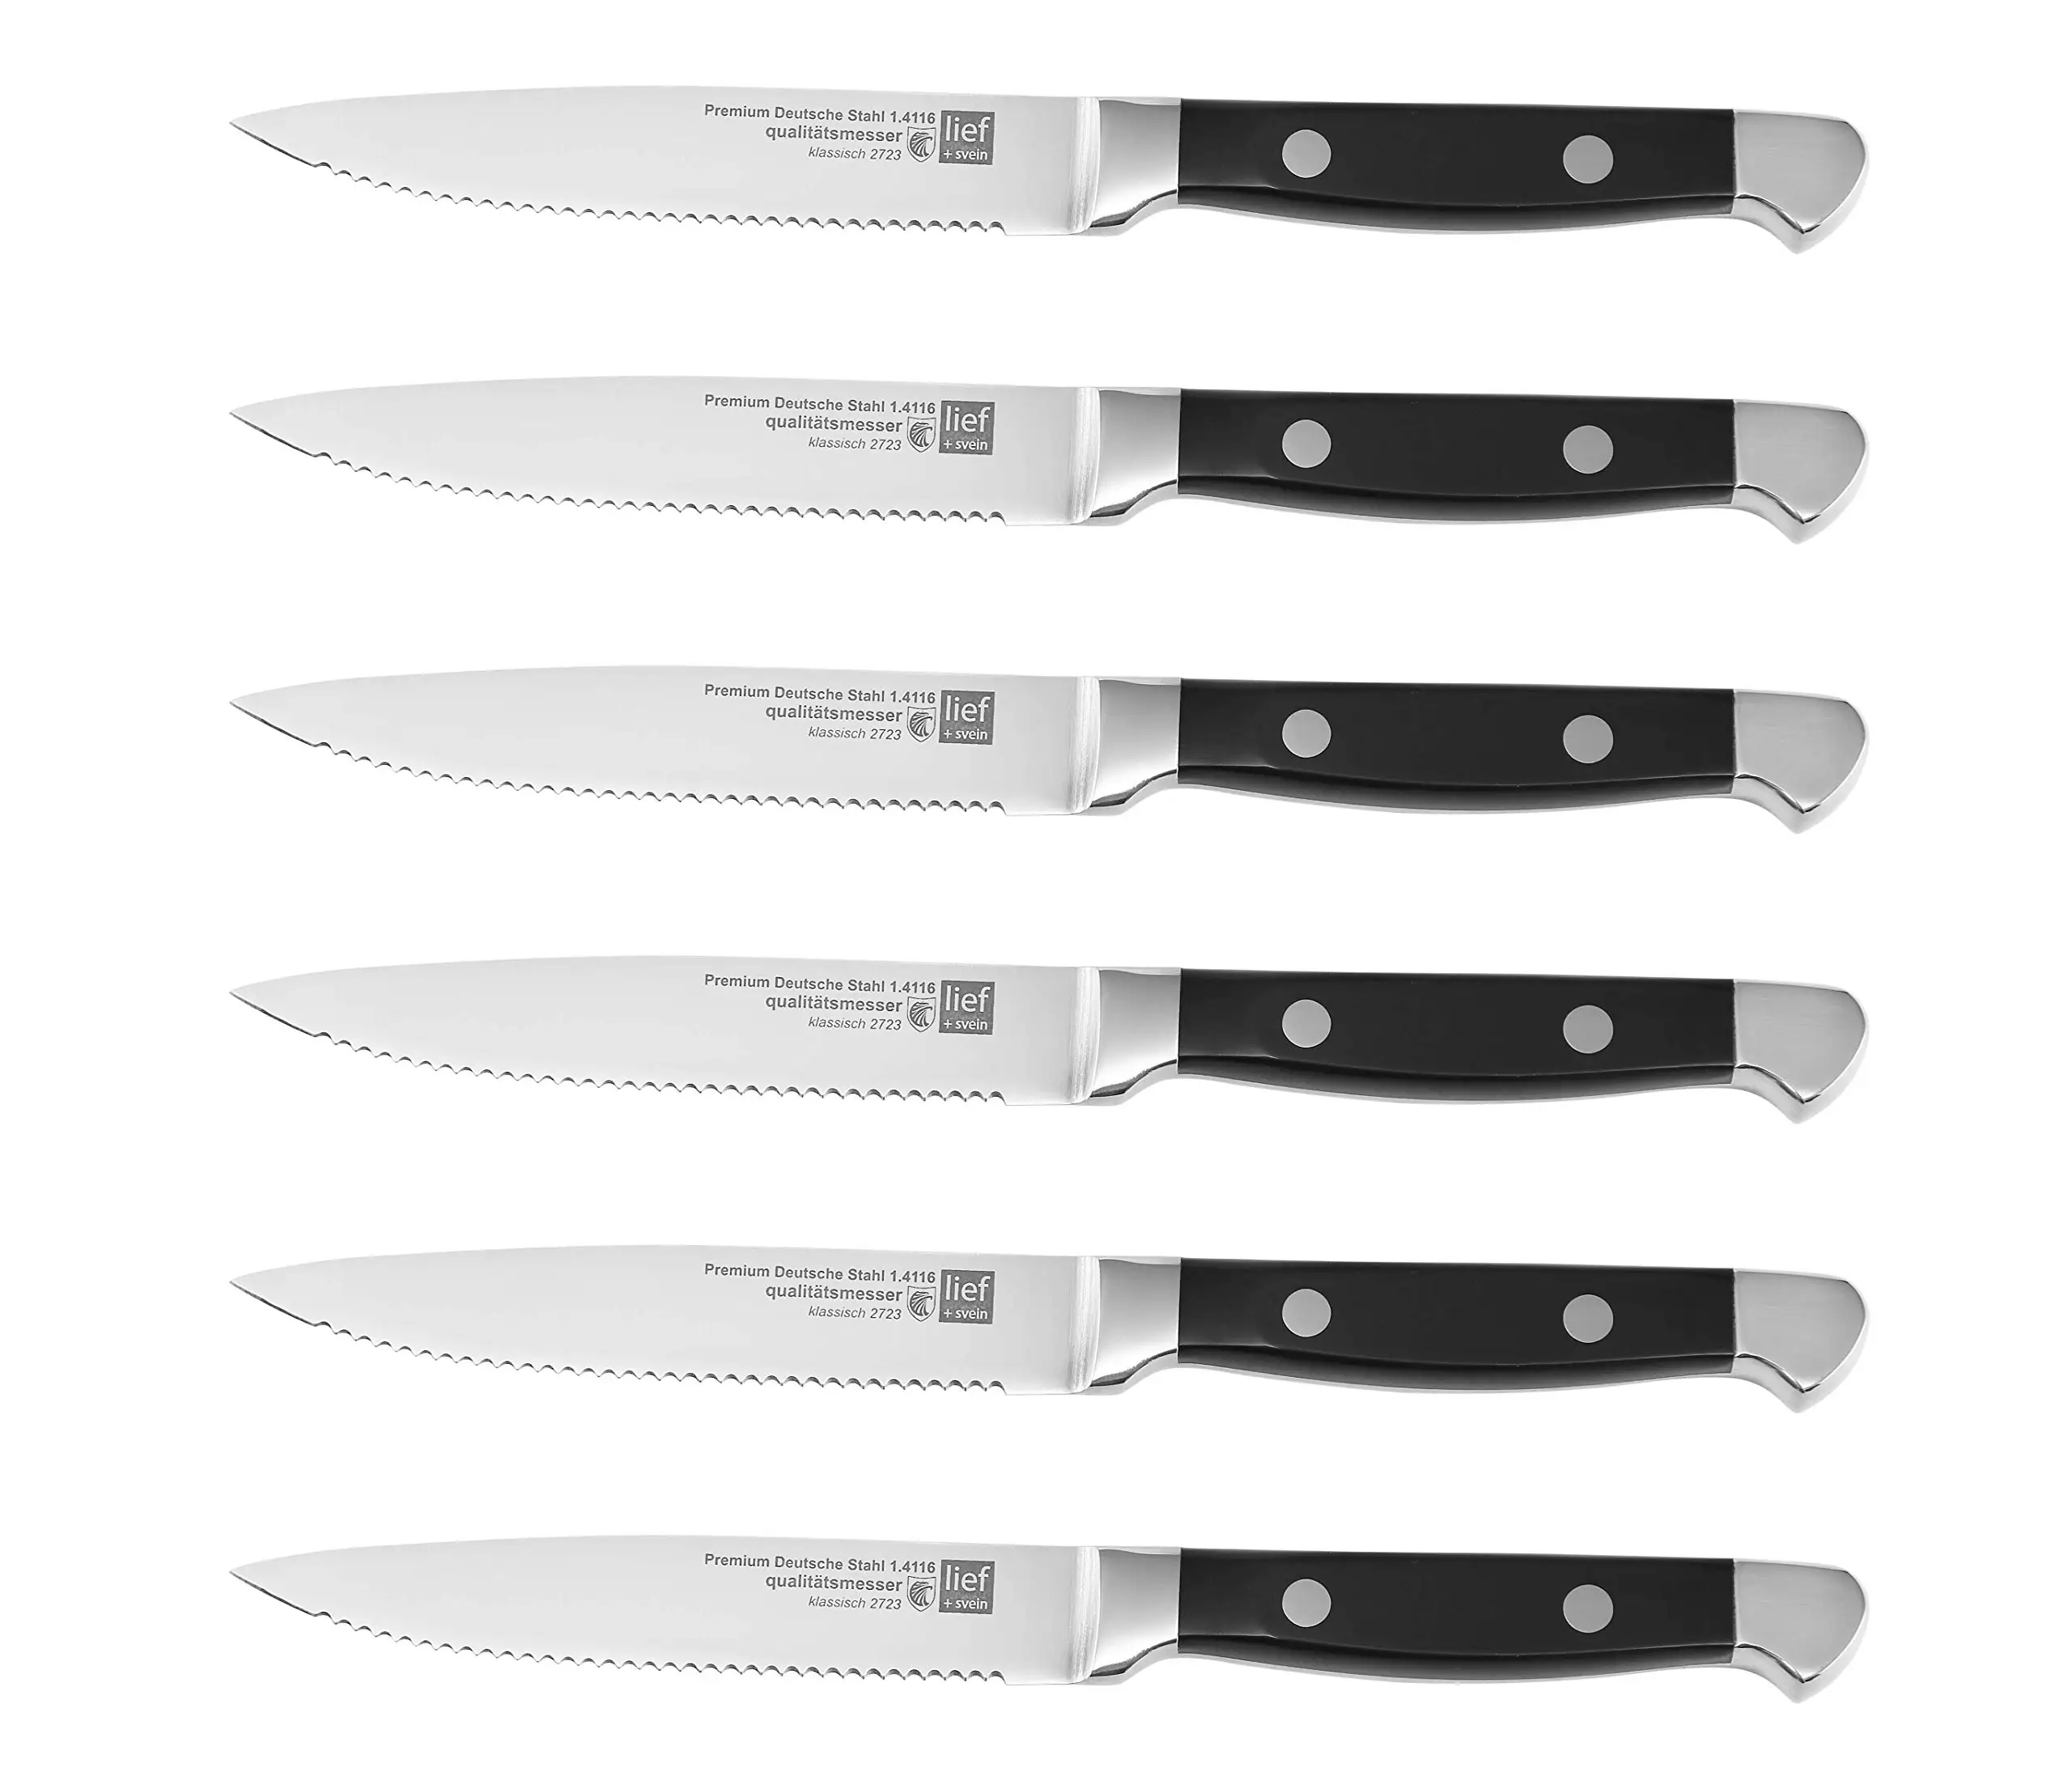 https://ae01.alicdn.com/kf/S12440d1f73c548c09b40b193e3f55748k/Kitchen-Knife-And-Steak-Knives-Set-Professional-Quality-Chef-Cleaver-Meat-Bread-Santoku-Utility-Paring-Knife.jpg